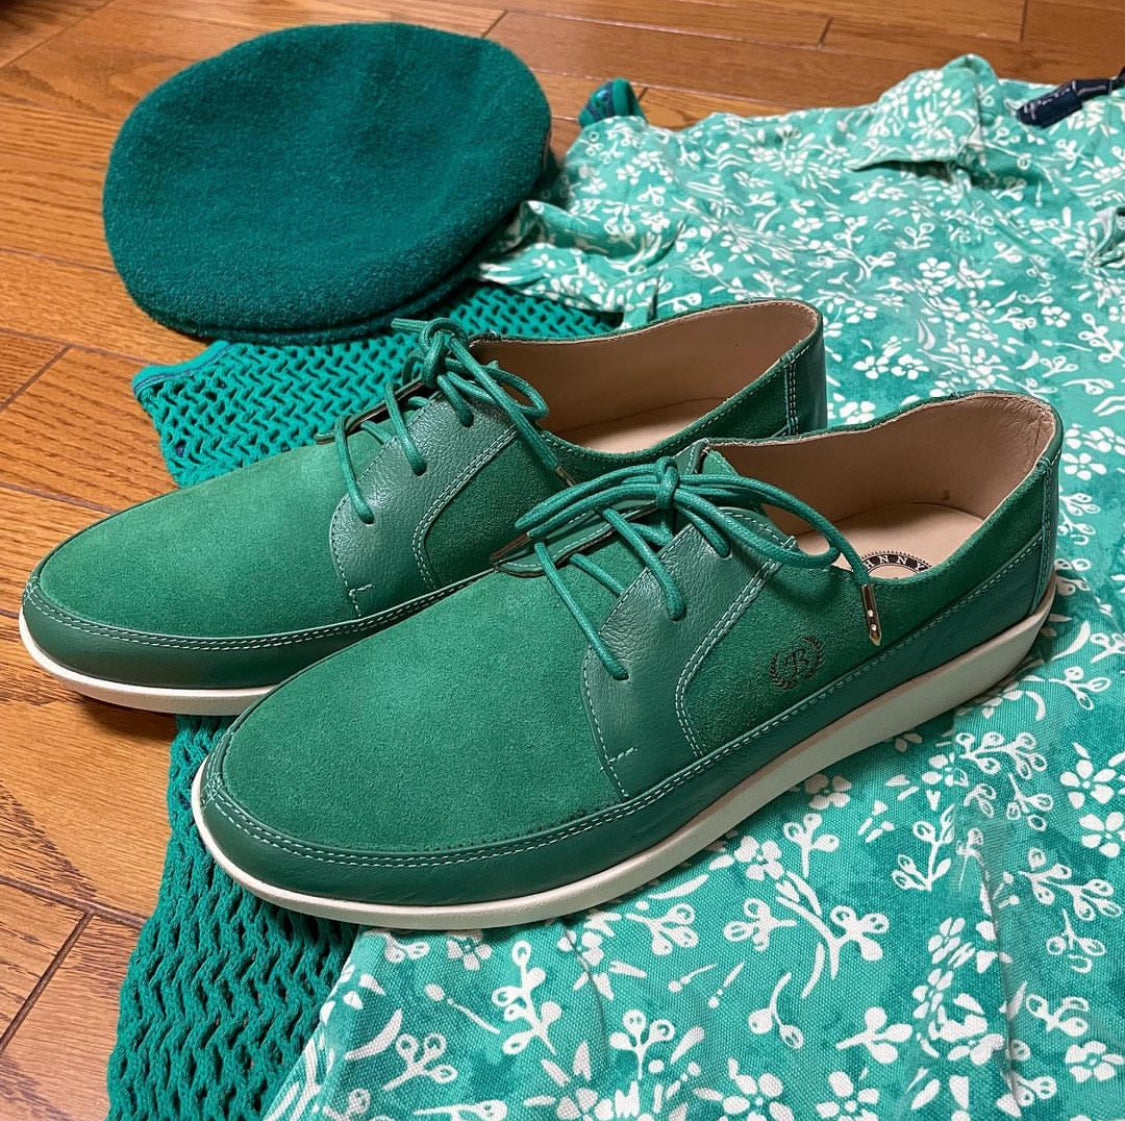 Johnny Famous Bally Style Park West Men's Green Leather and Suede Low Tops, a versatile and stylish footwear option for men